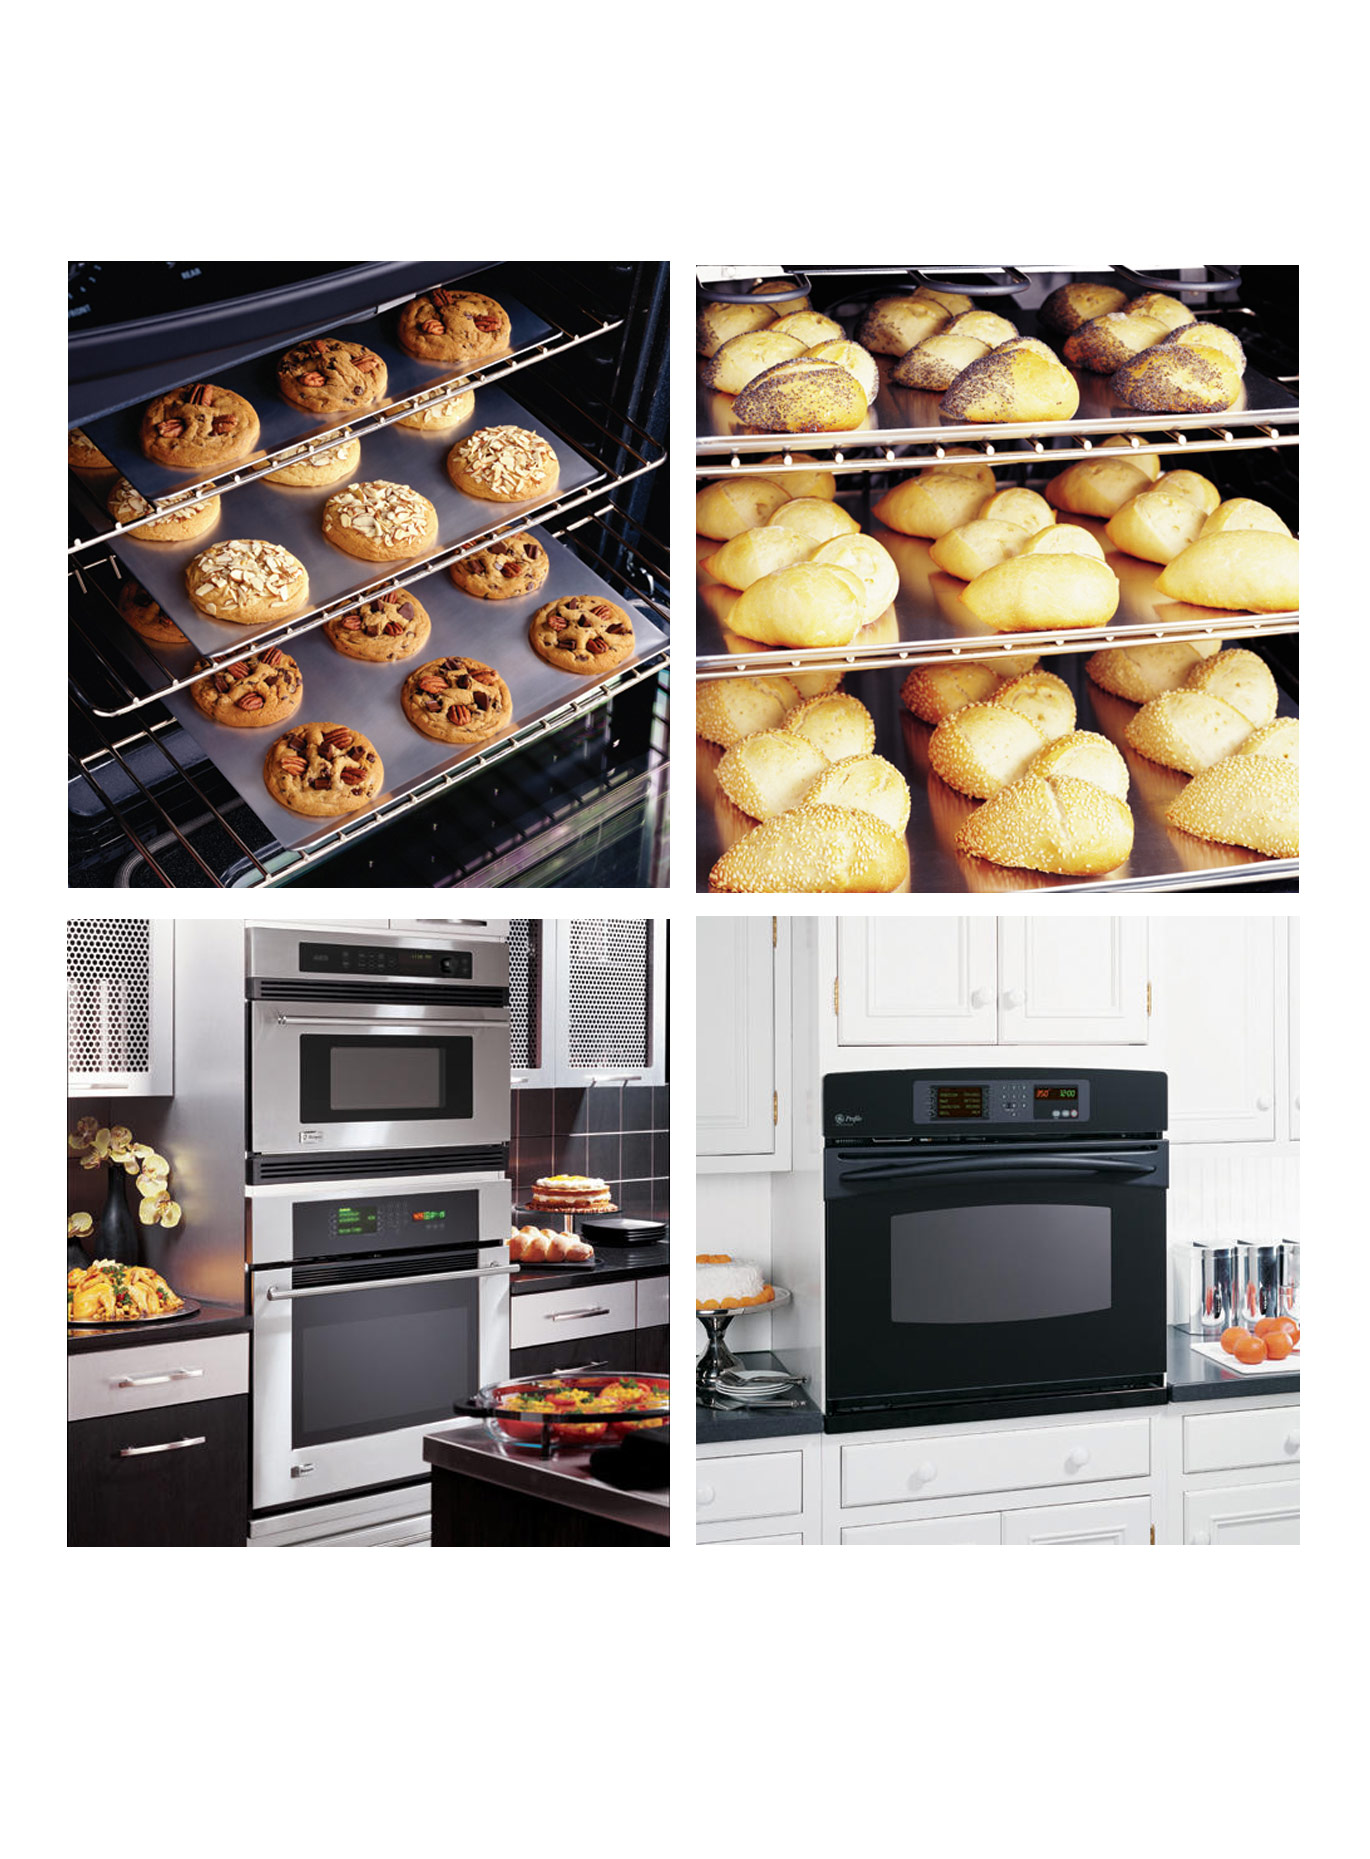 Trivection Ovens launched